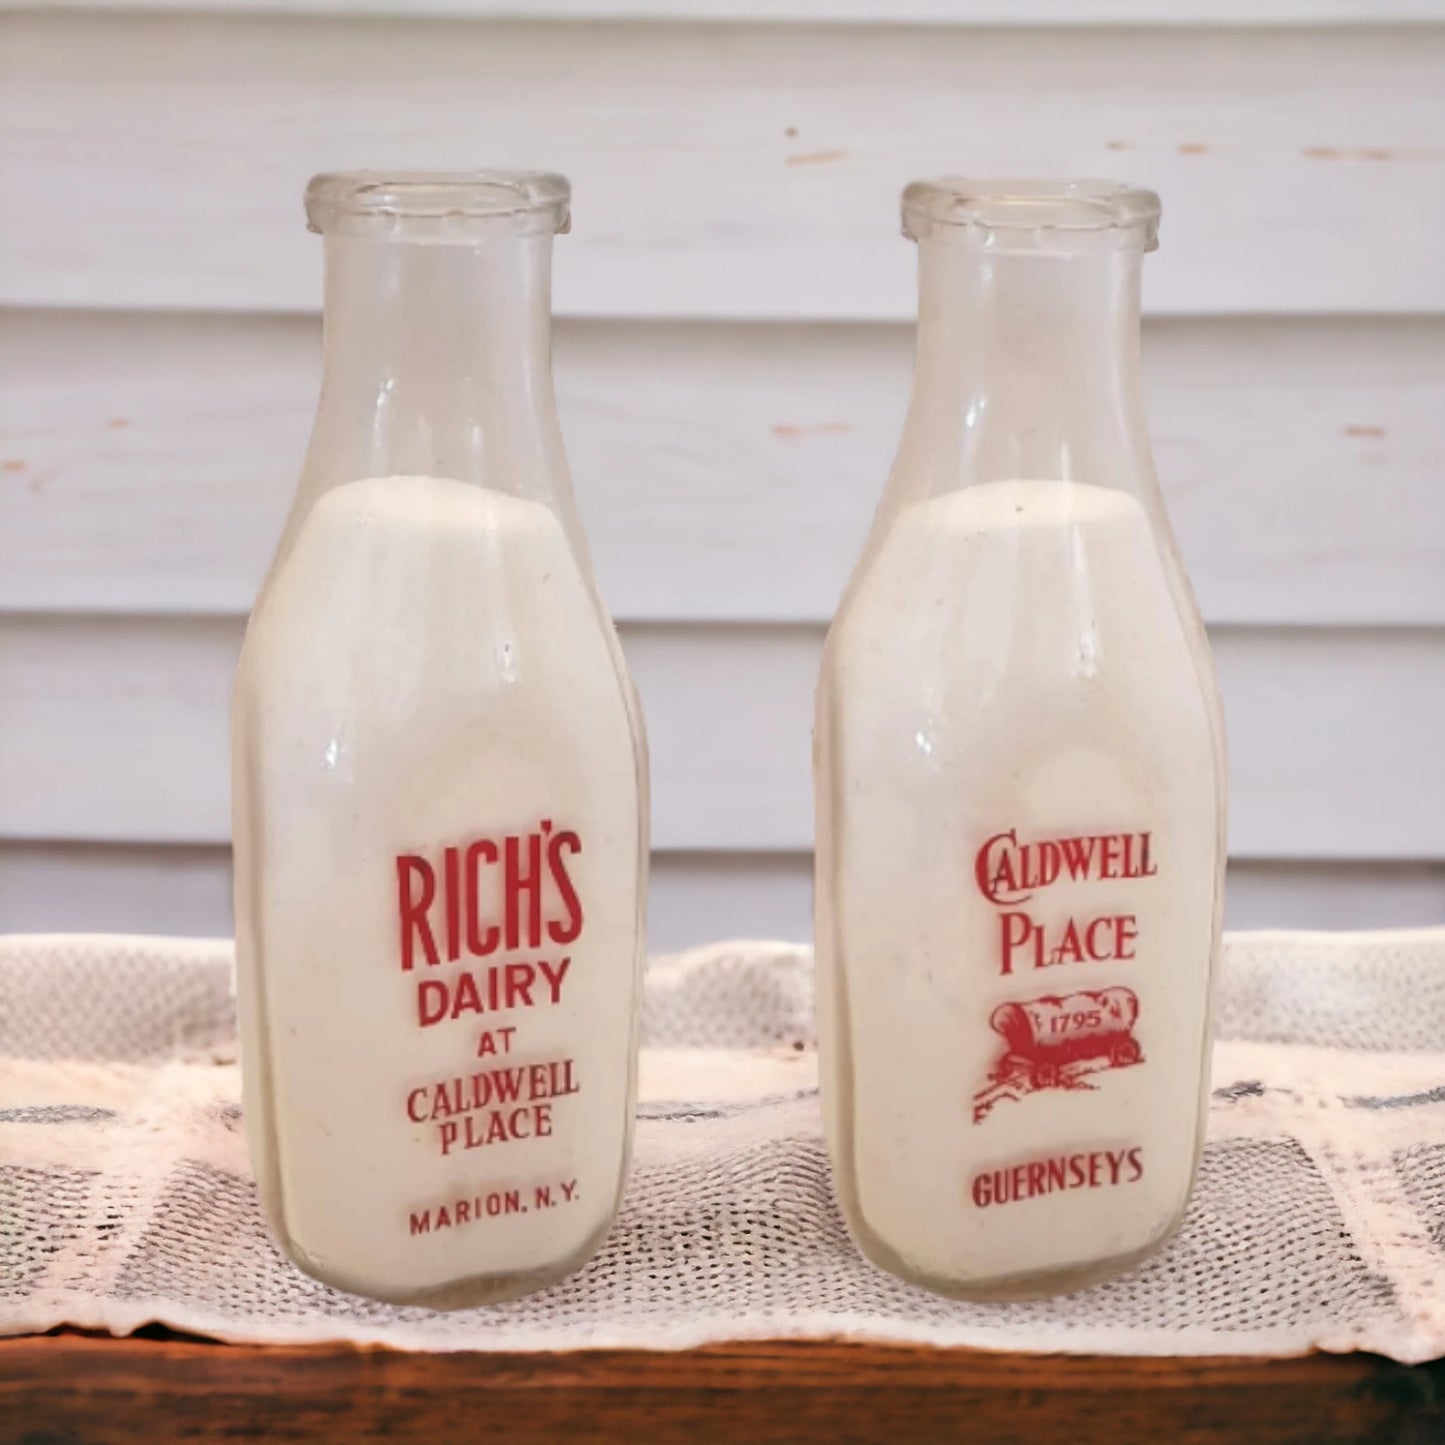 Rich's Dairy Milk Bottle Caldwell Place New York